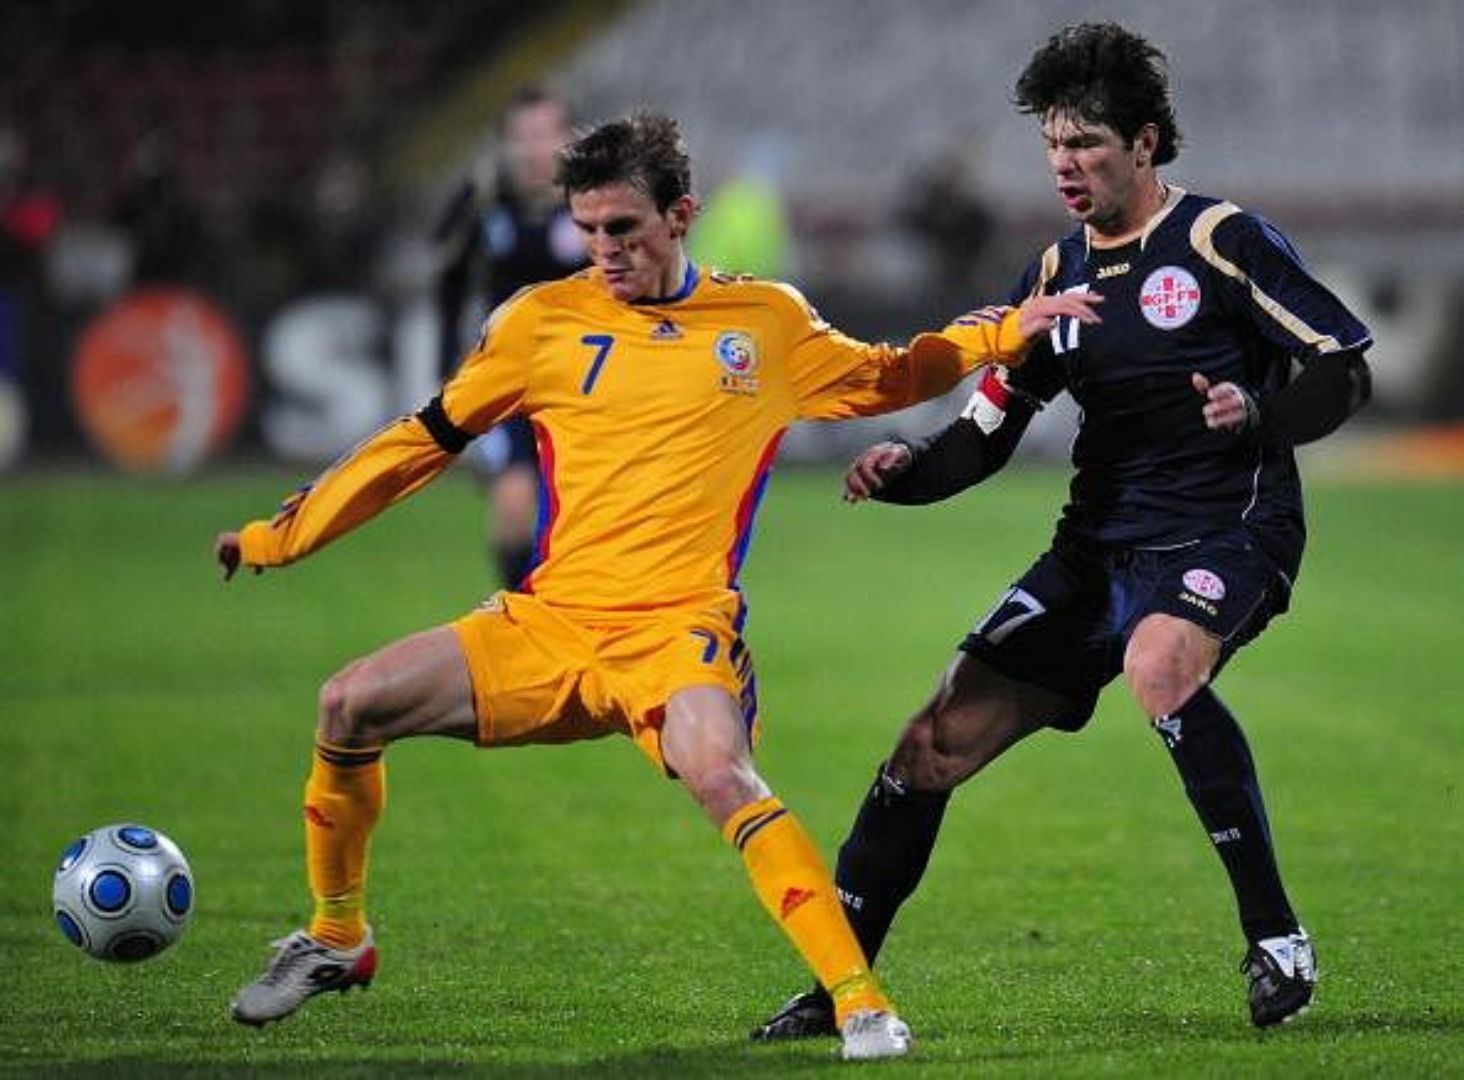 Costin Lazar (L), in action for the Romanian team.